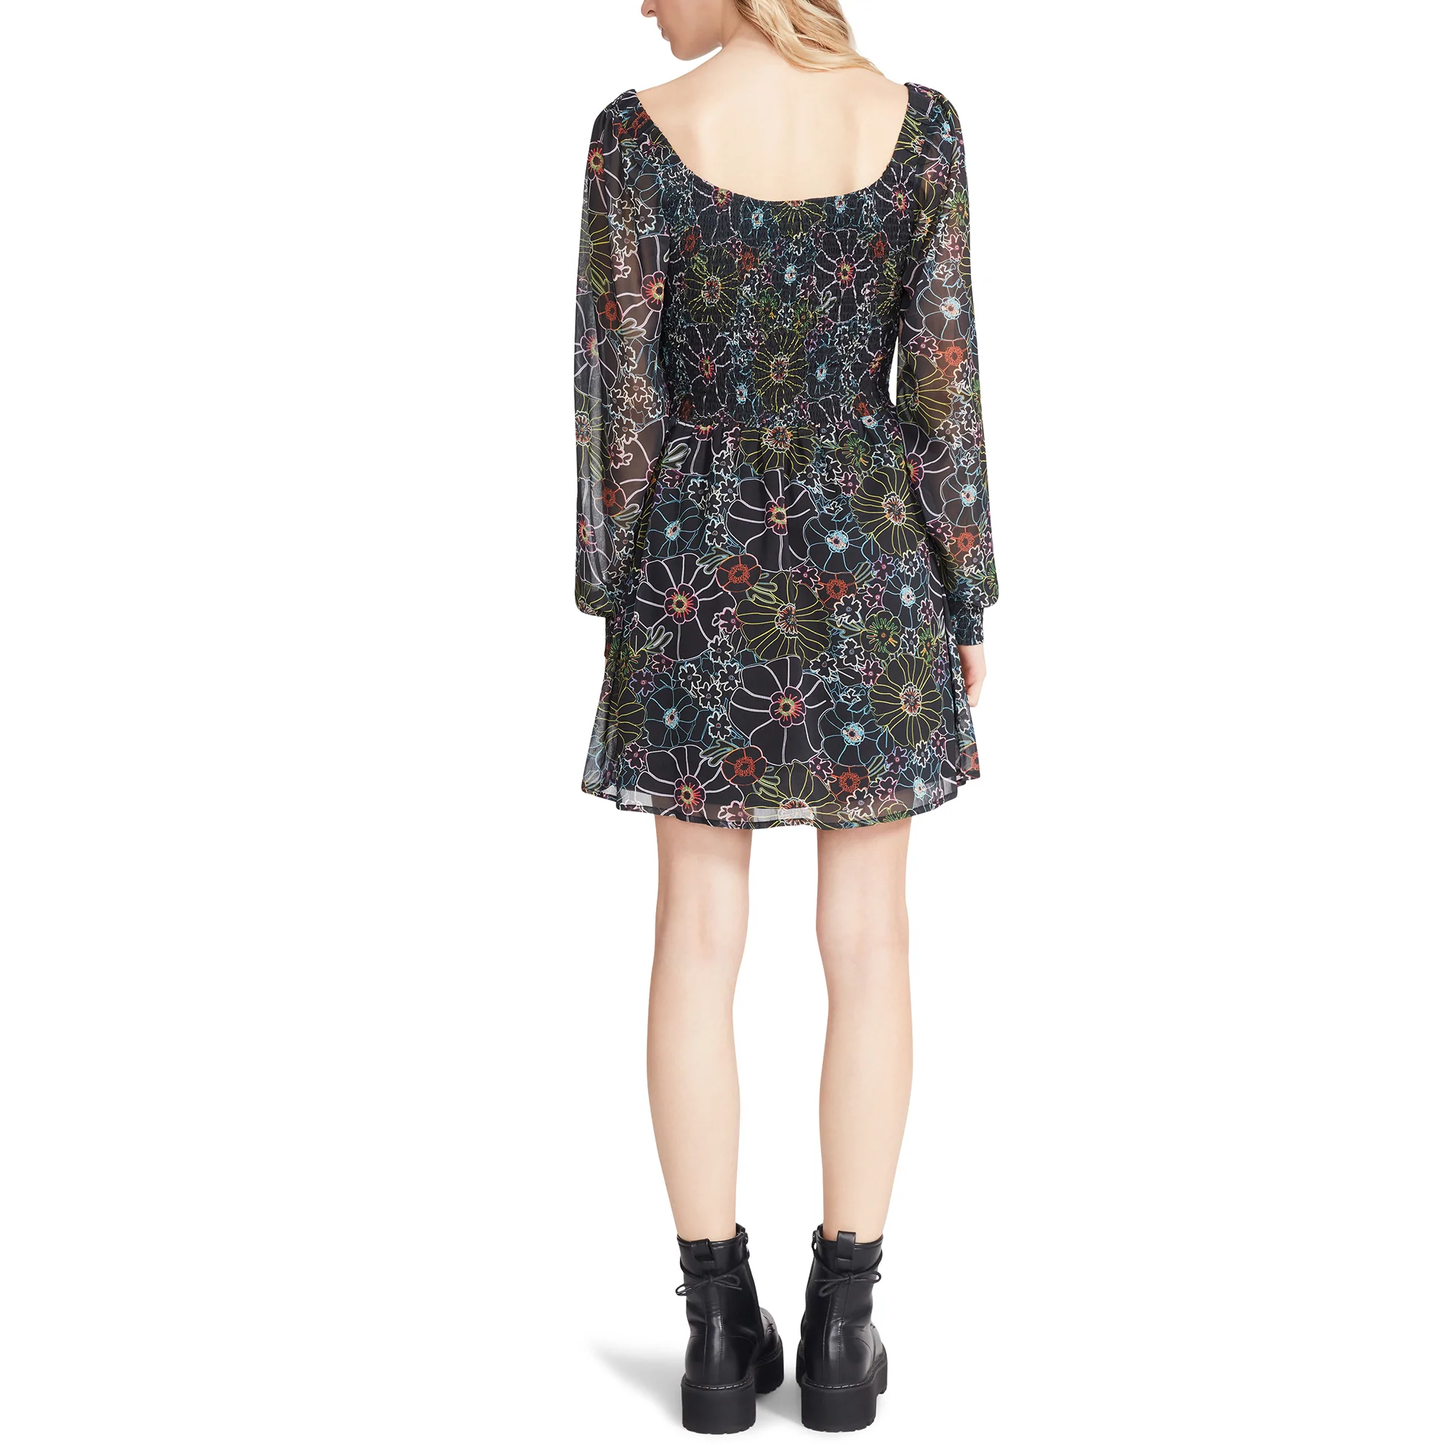 Get ready for spring with this light weight floral dress featuring a smocked bodice and long sheer puff sleeves.